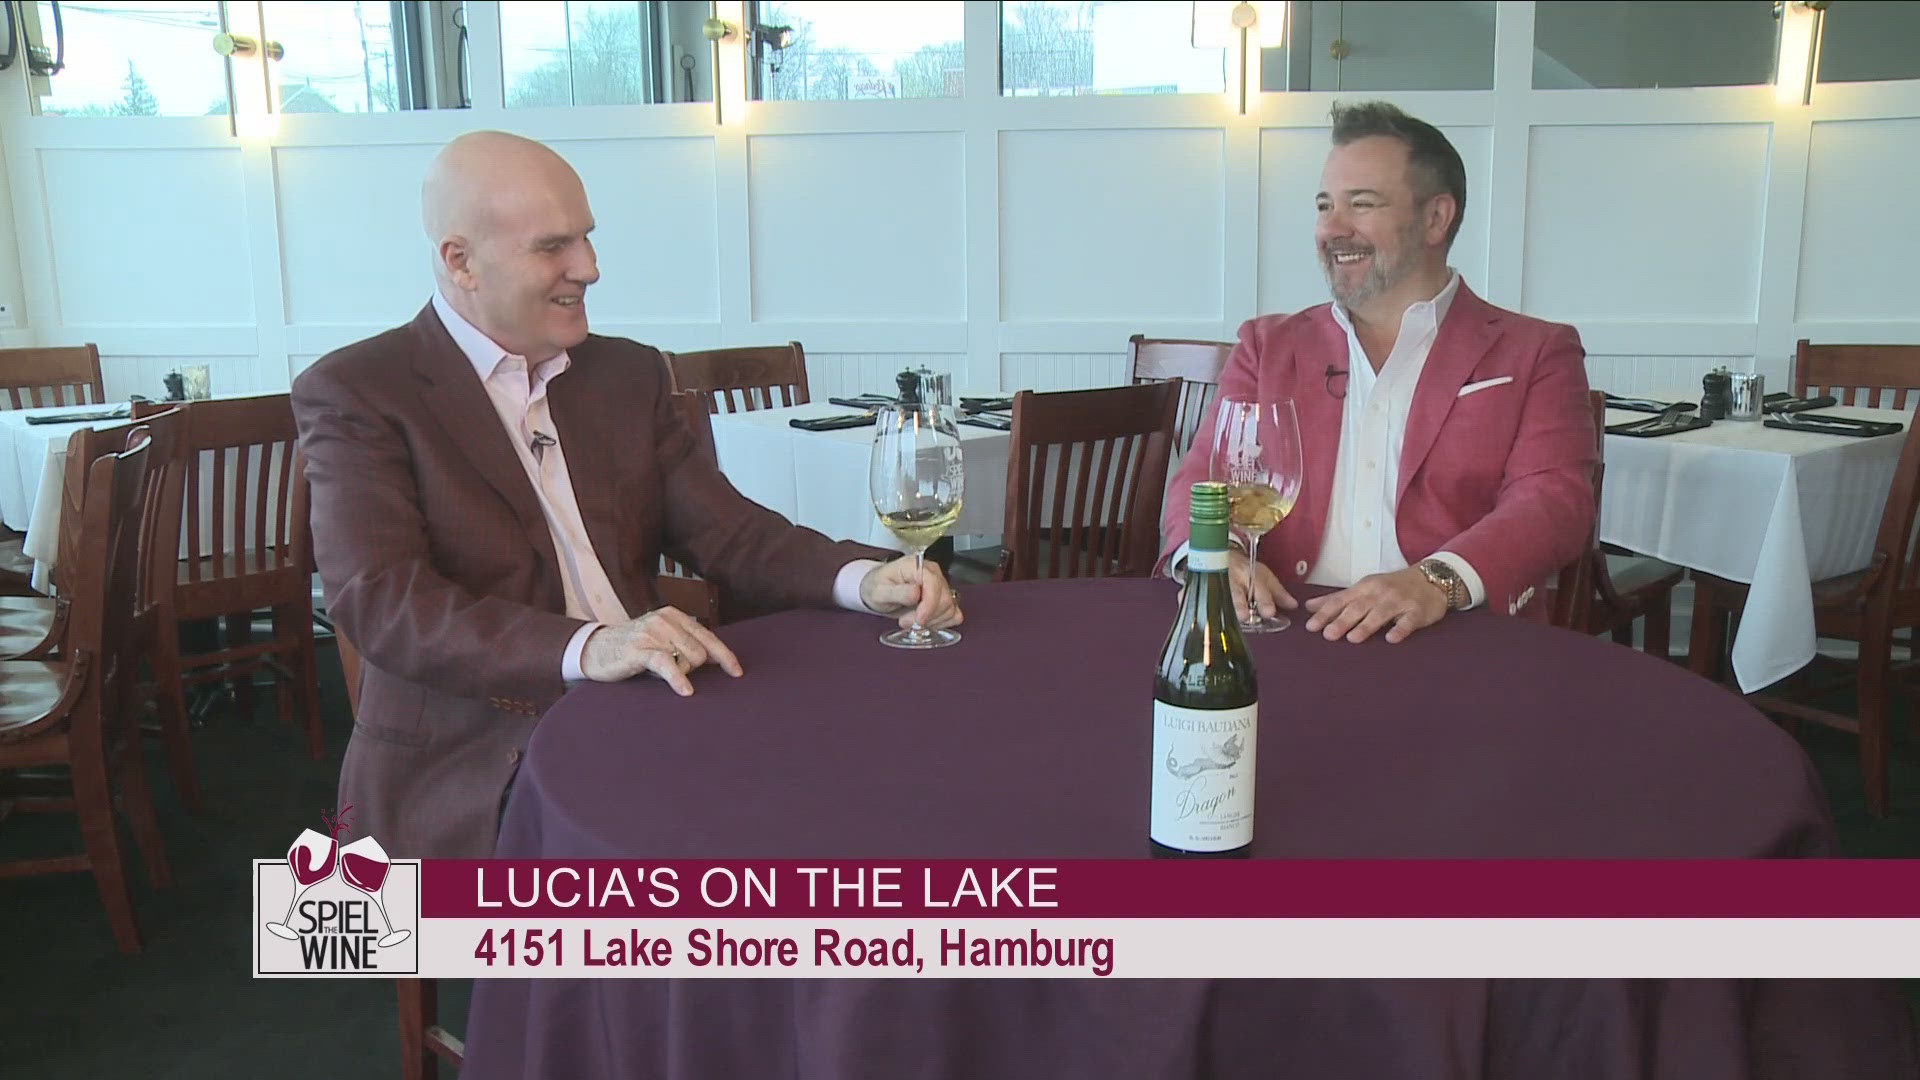 Spiel the Wine -- April 27 -- Segment 3 THIS VIDEO IS SPONSORED BY LUCIA'S ON THE LAKE